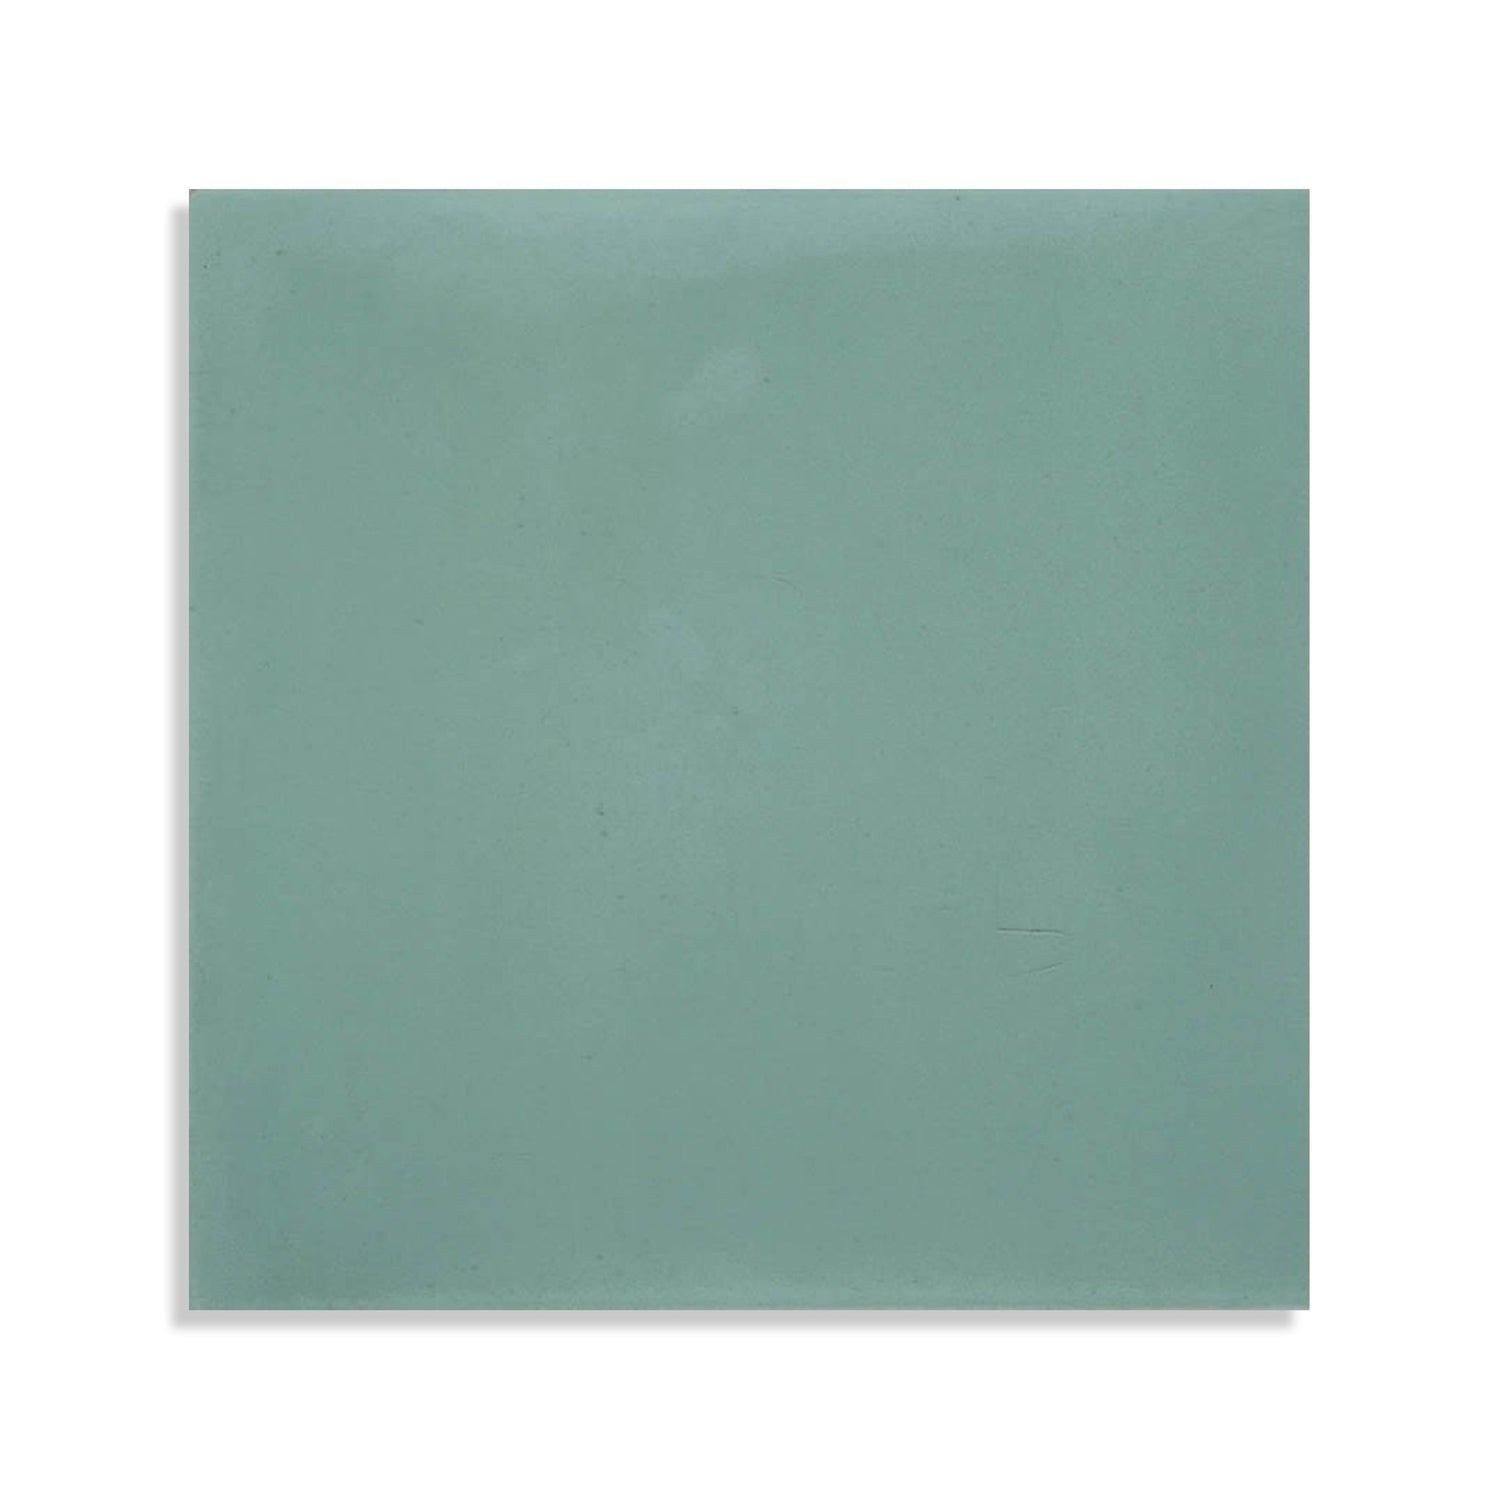 Moroccan Encaustic Cement Light Turquoise, 20 x 20cm - Tiles &amp; Stone To You